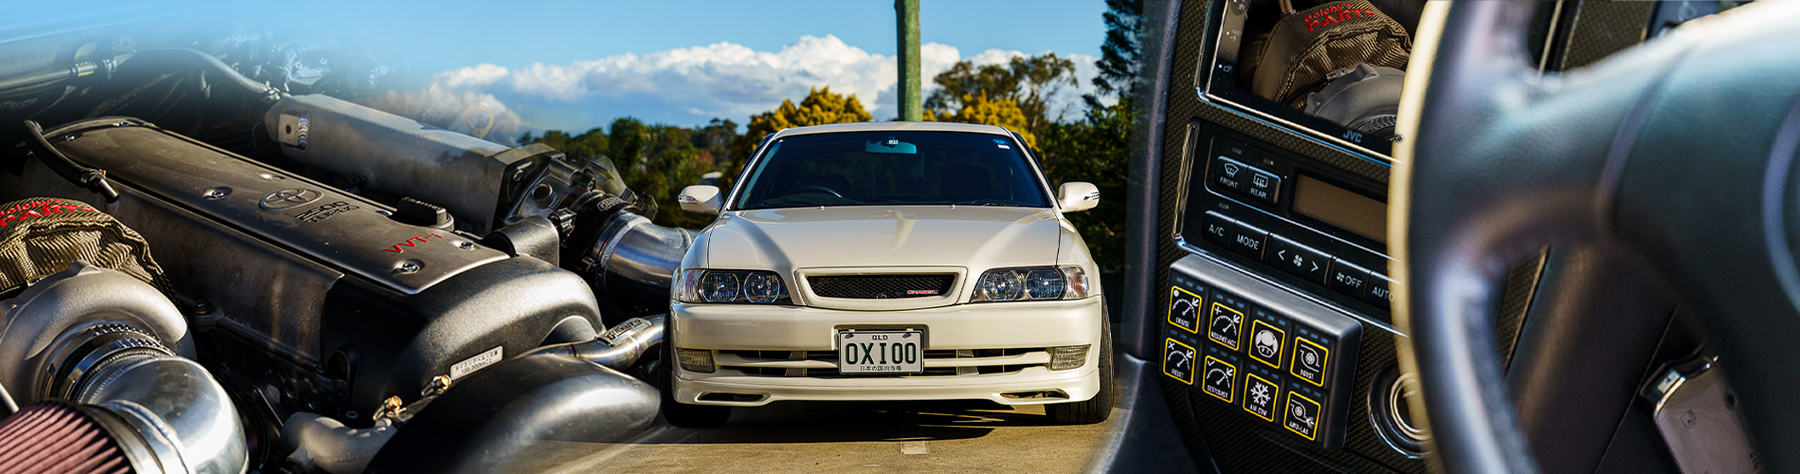 Richie's JZX100 Chaser